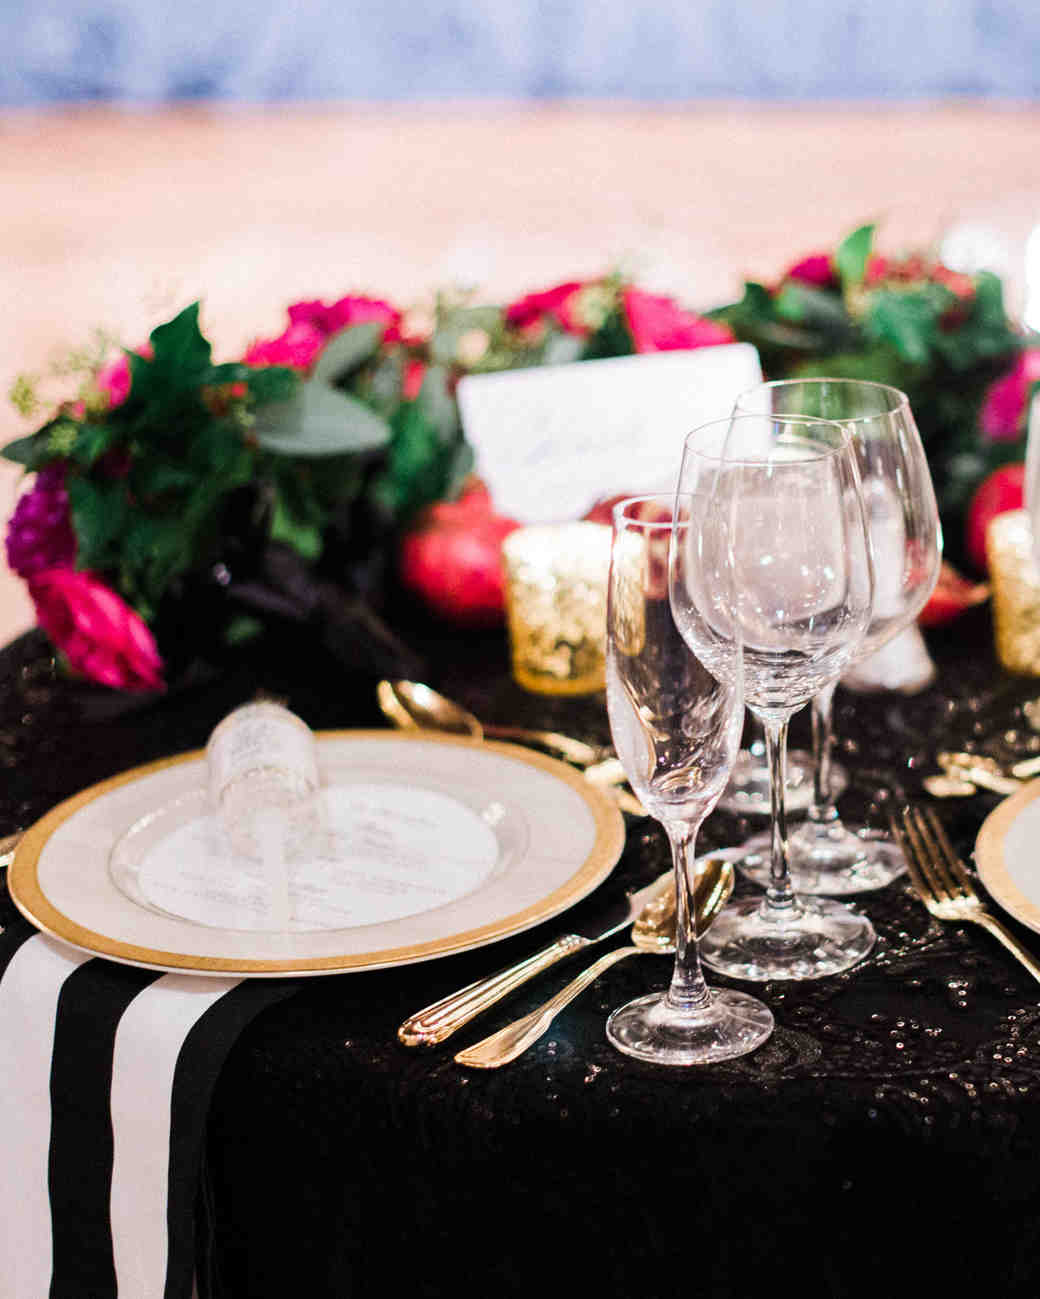 JewelToned Wedding Centerpieces That Will Dazzle Your